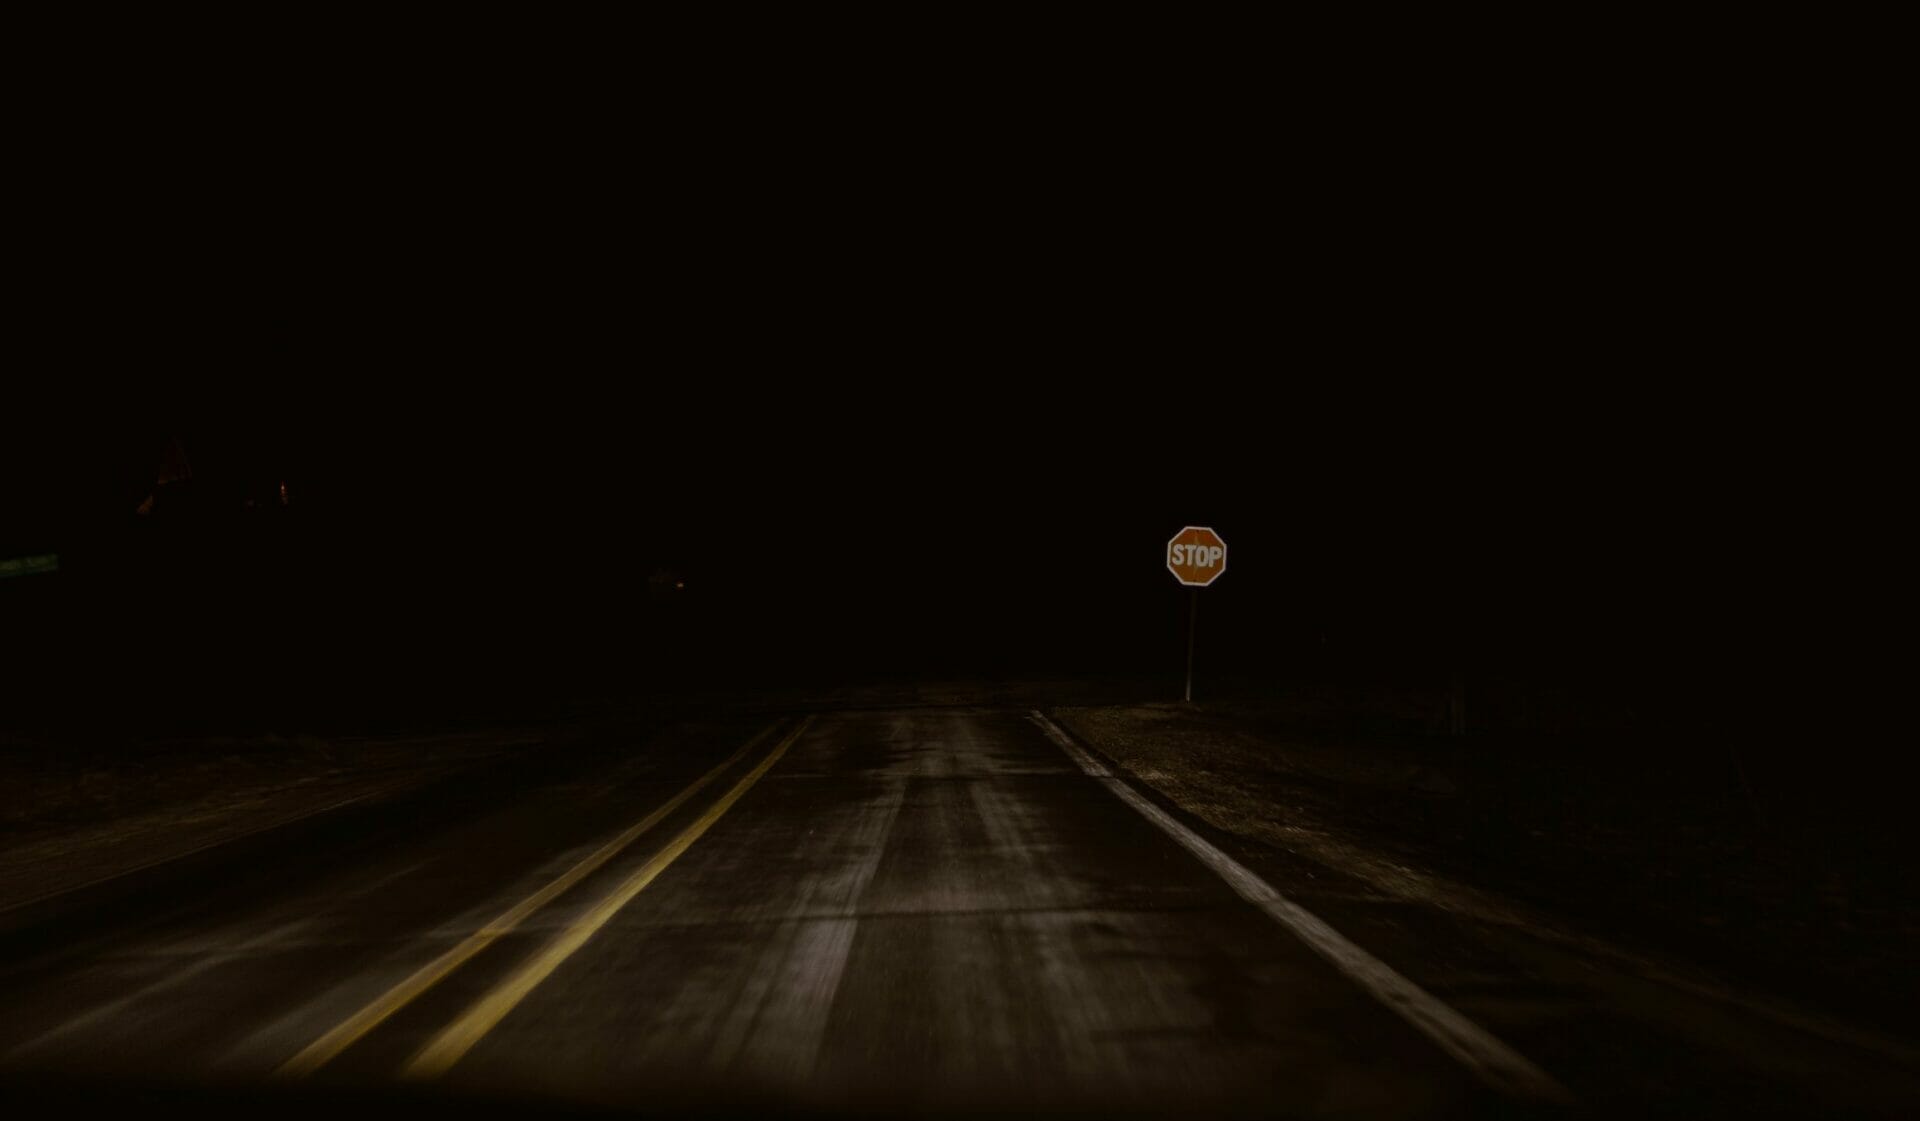 Stop sign in the dark - What Can Our Fears Teach Us?